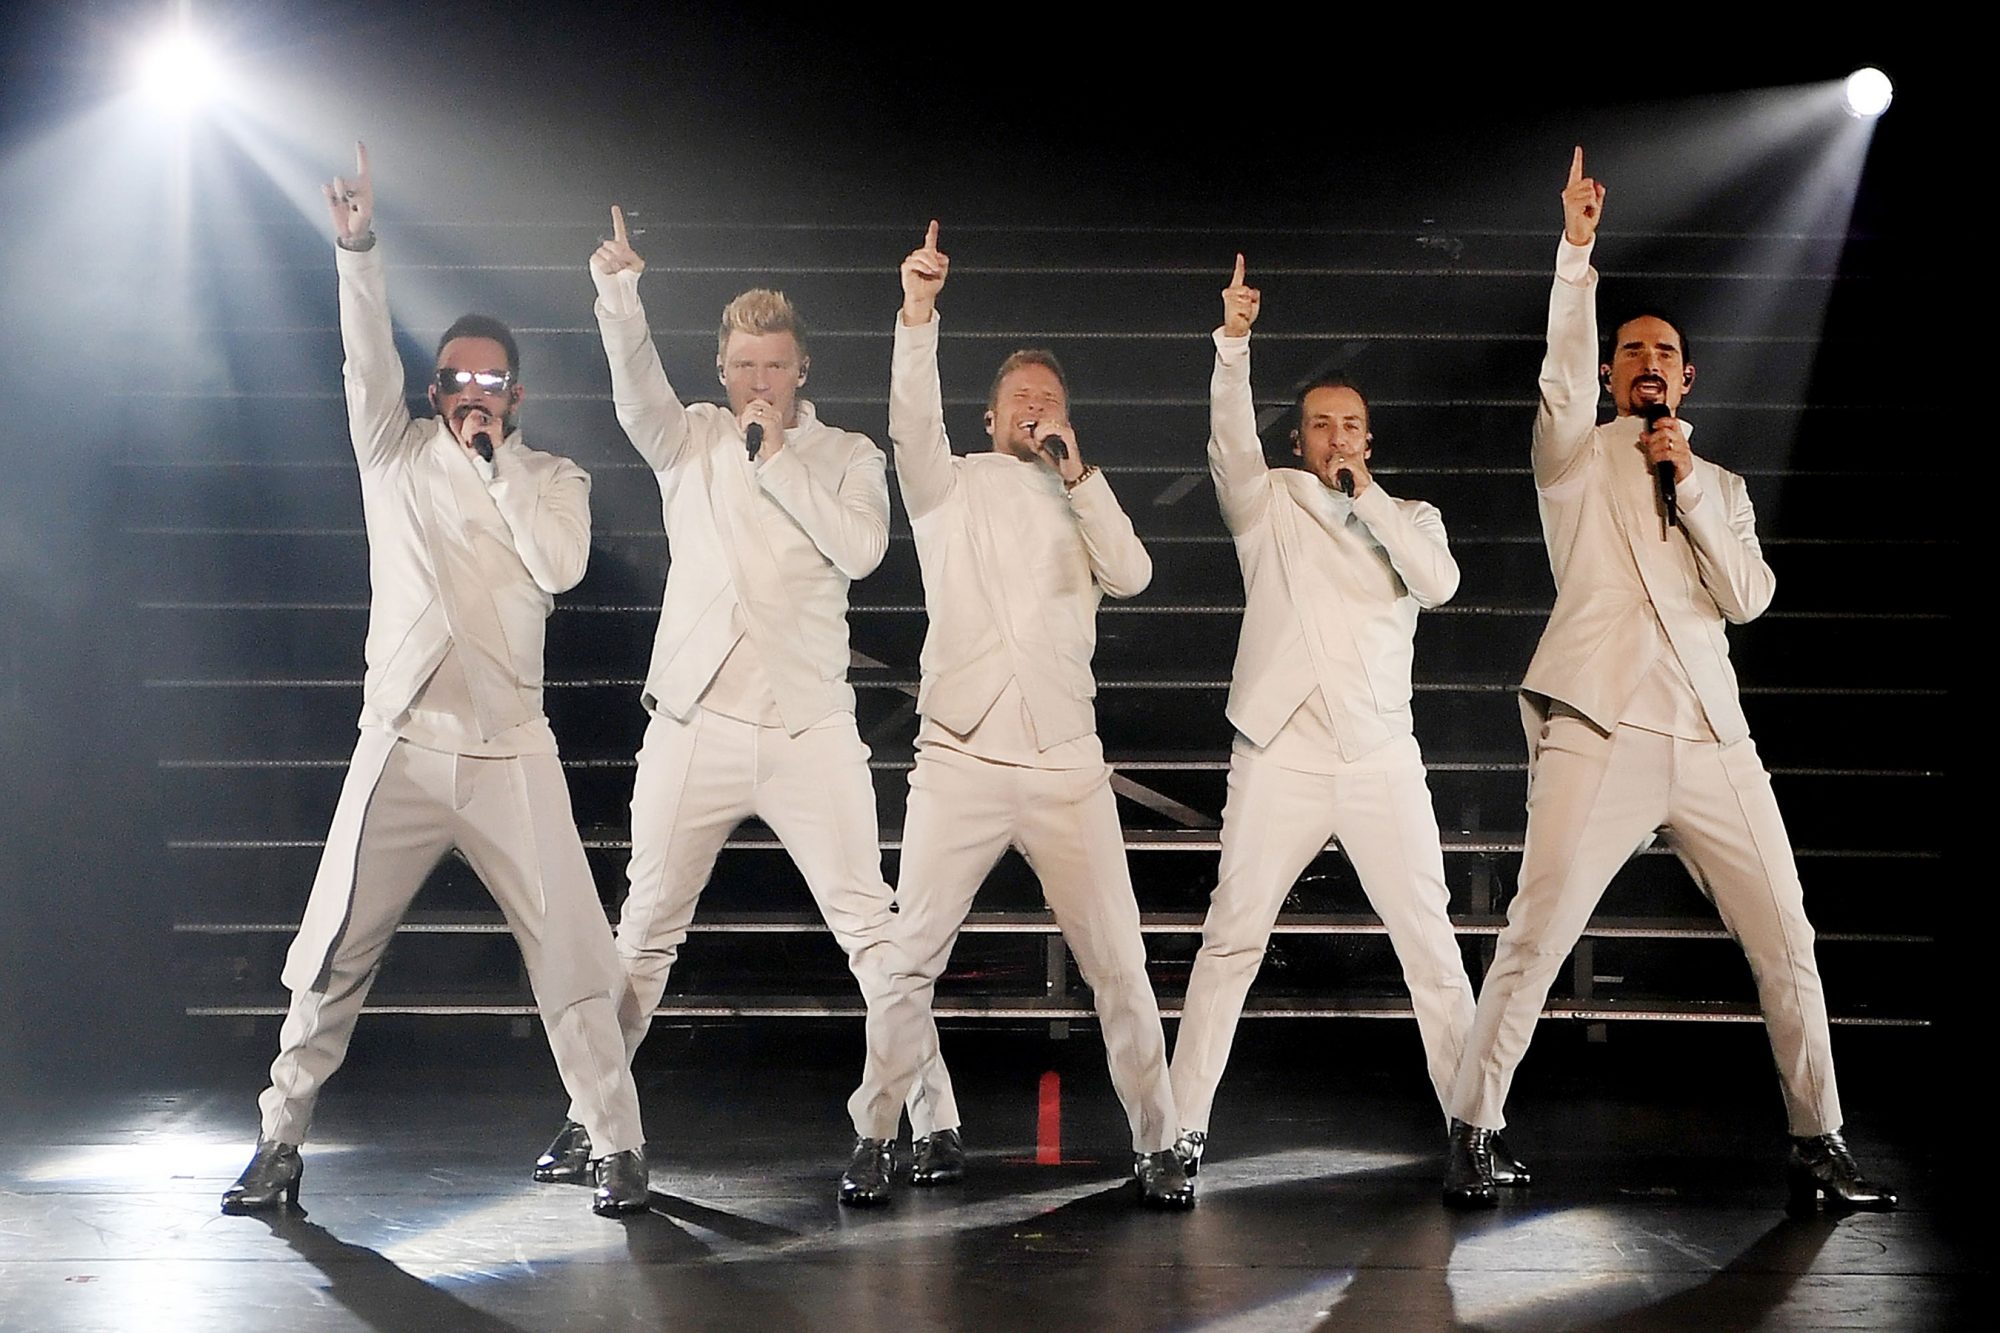 Backstreet Boys wearing white outfit while performing